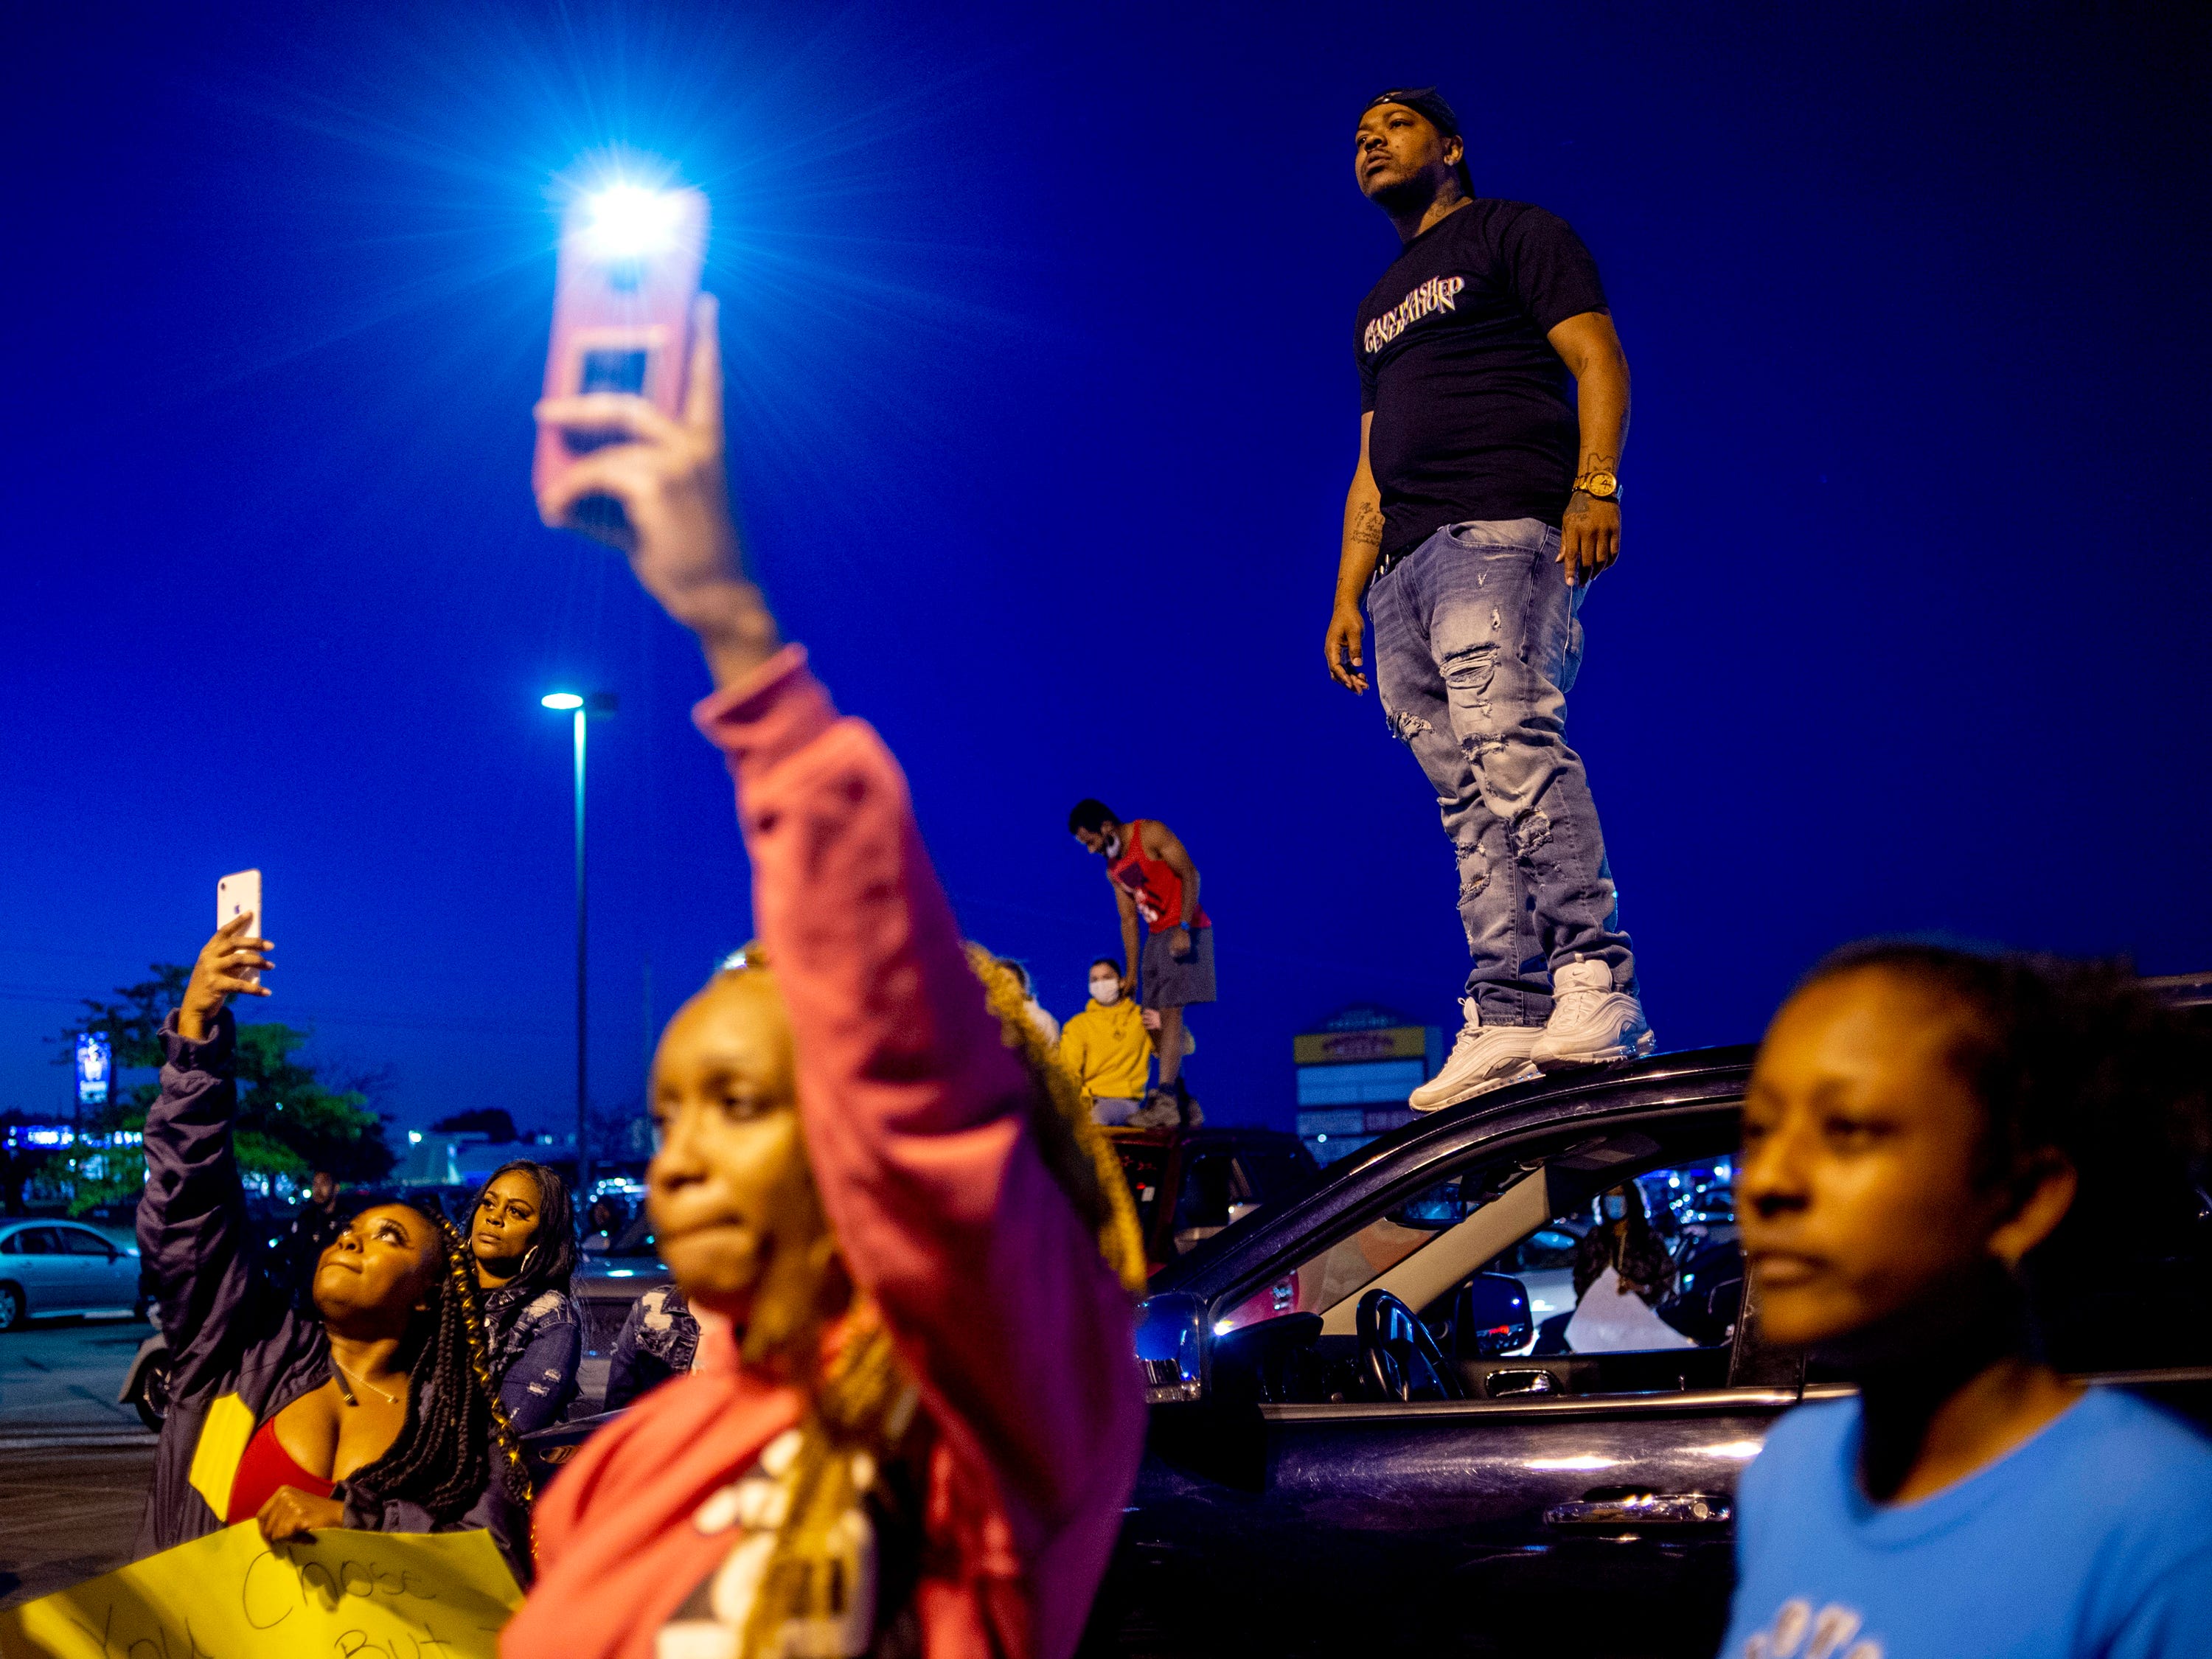 Darrell Campbell of Flint stands atop a vehicle as hundreds protest peacefully, seeking justice for George Floyd on Saturday, May 30, 2020 on Miller Road in Flint Township, M.I. Floyd died in police custody on Memorial Day in Minneapolis.